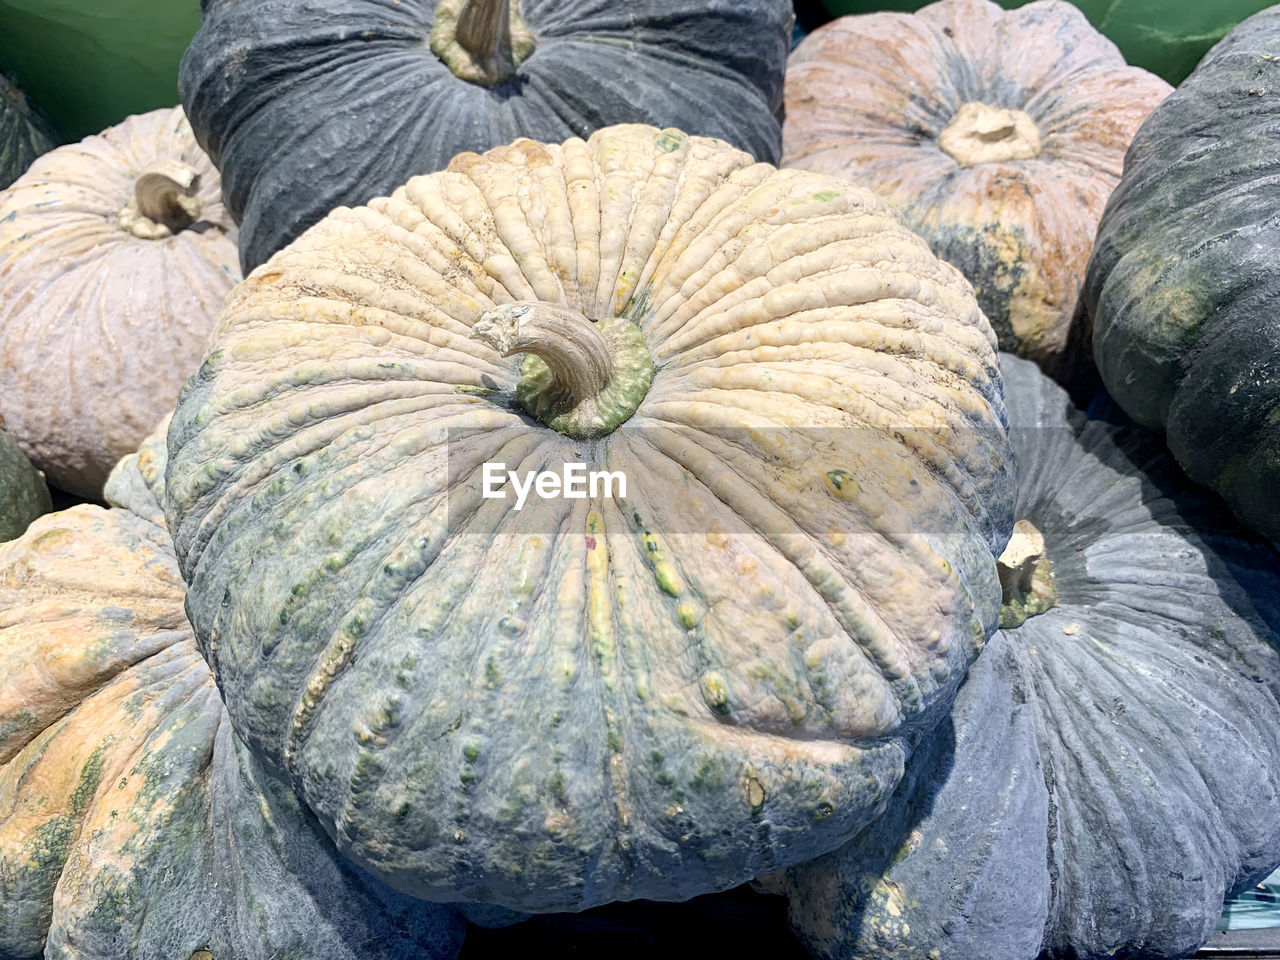 food and drink, food, pumpkin, vegetable, healthy eating, freshness, wellbeing, no people, winter squash, produce, gourd, nature, squash - vegetable, organic, market, day, high angle view, squash, outdoors, close-up, still life, agriculture, plant, for sale, land, abundance